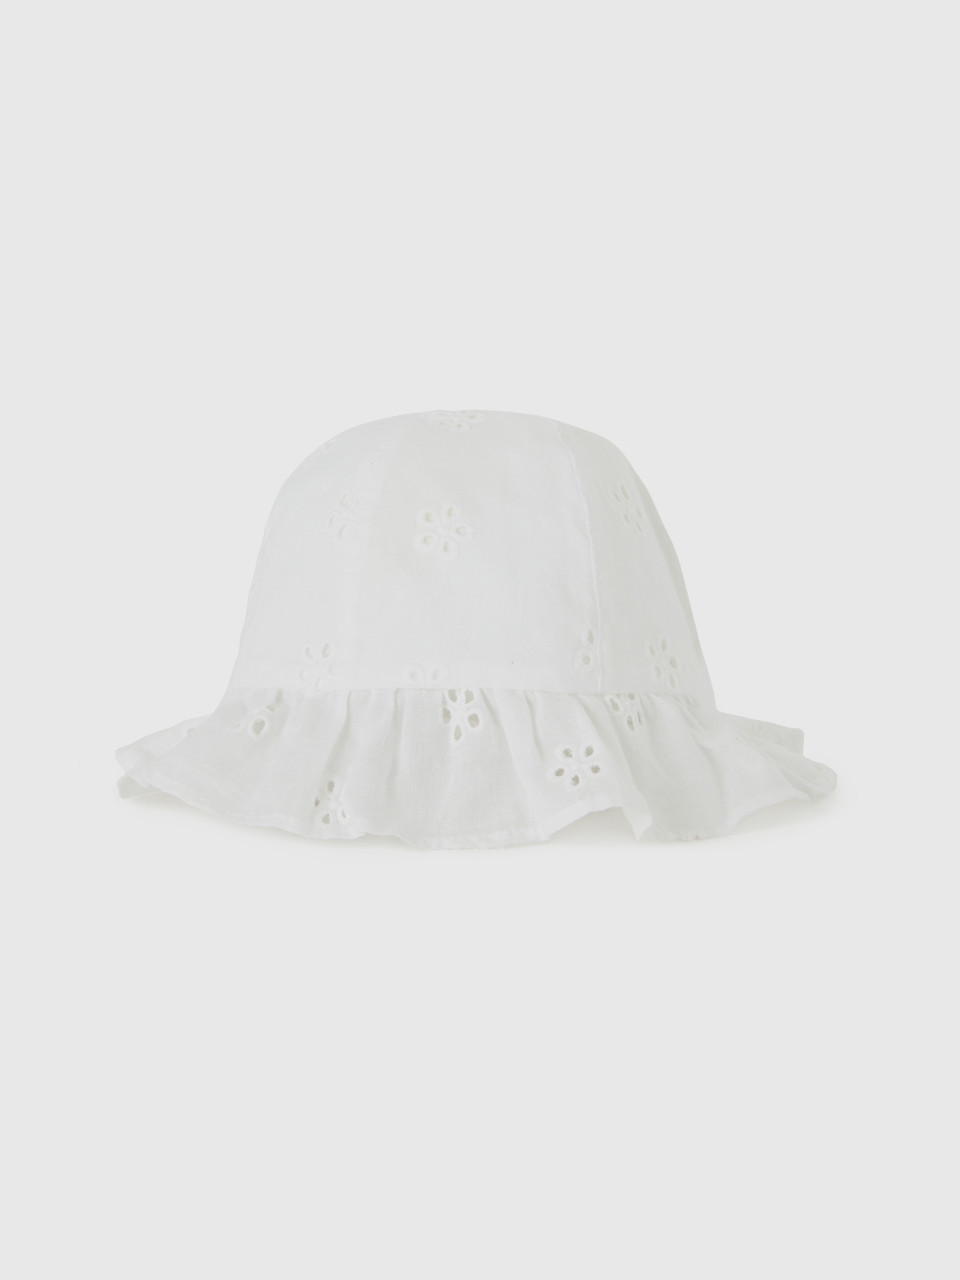 Benetton, Cap With Broderie Anglaise Embroidery, White, Kids